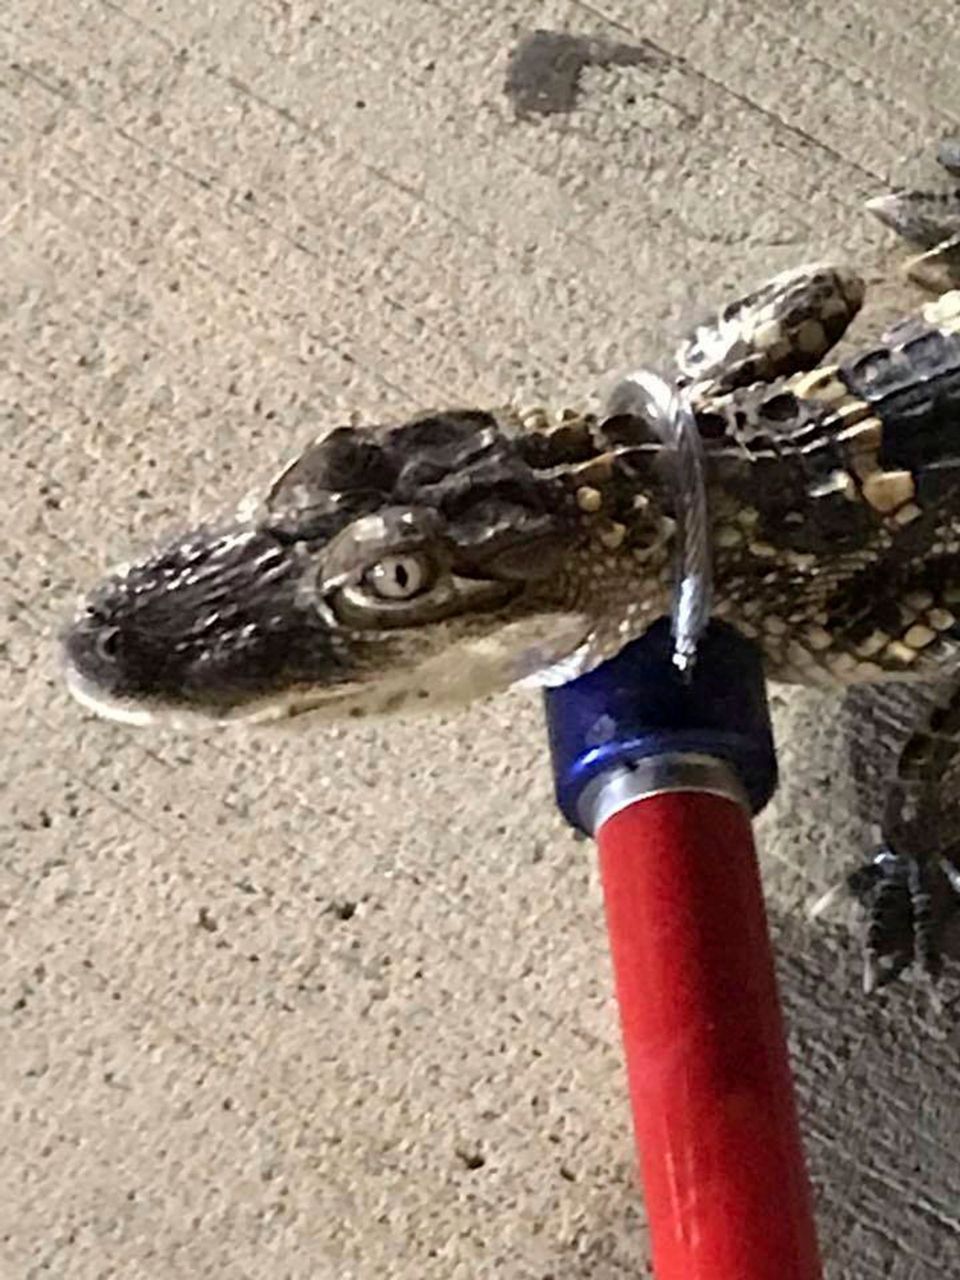 Pittsburgh marks its 4th alligator sighting since May